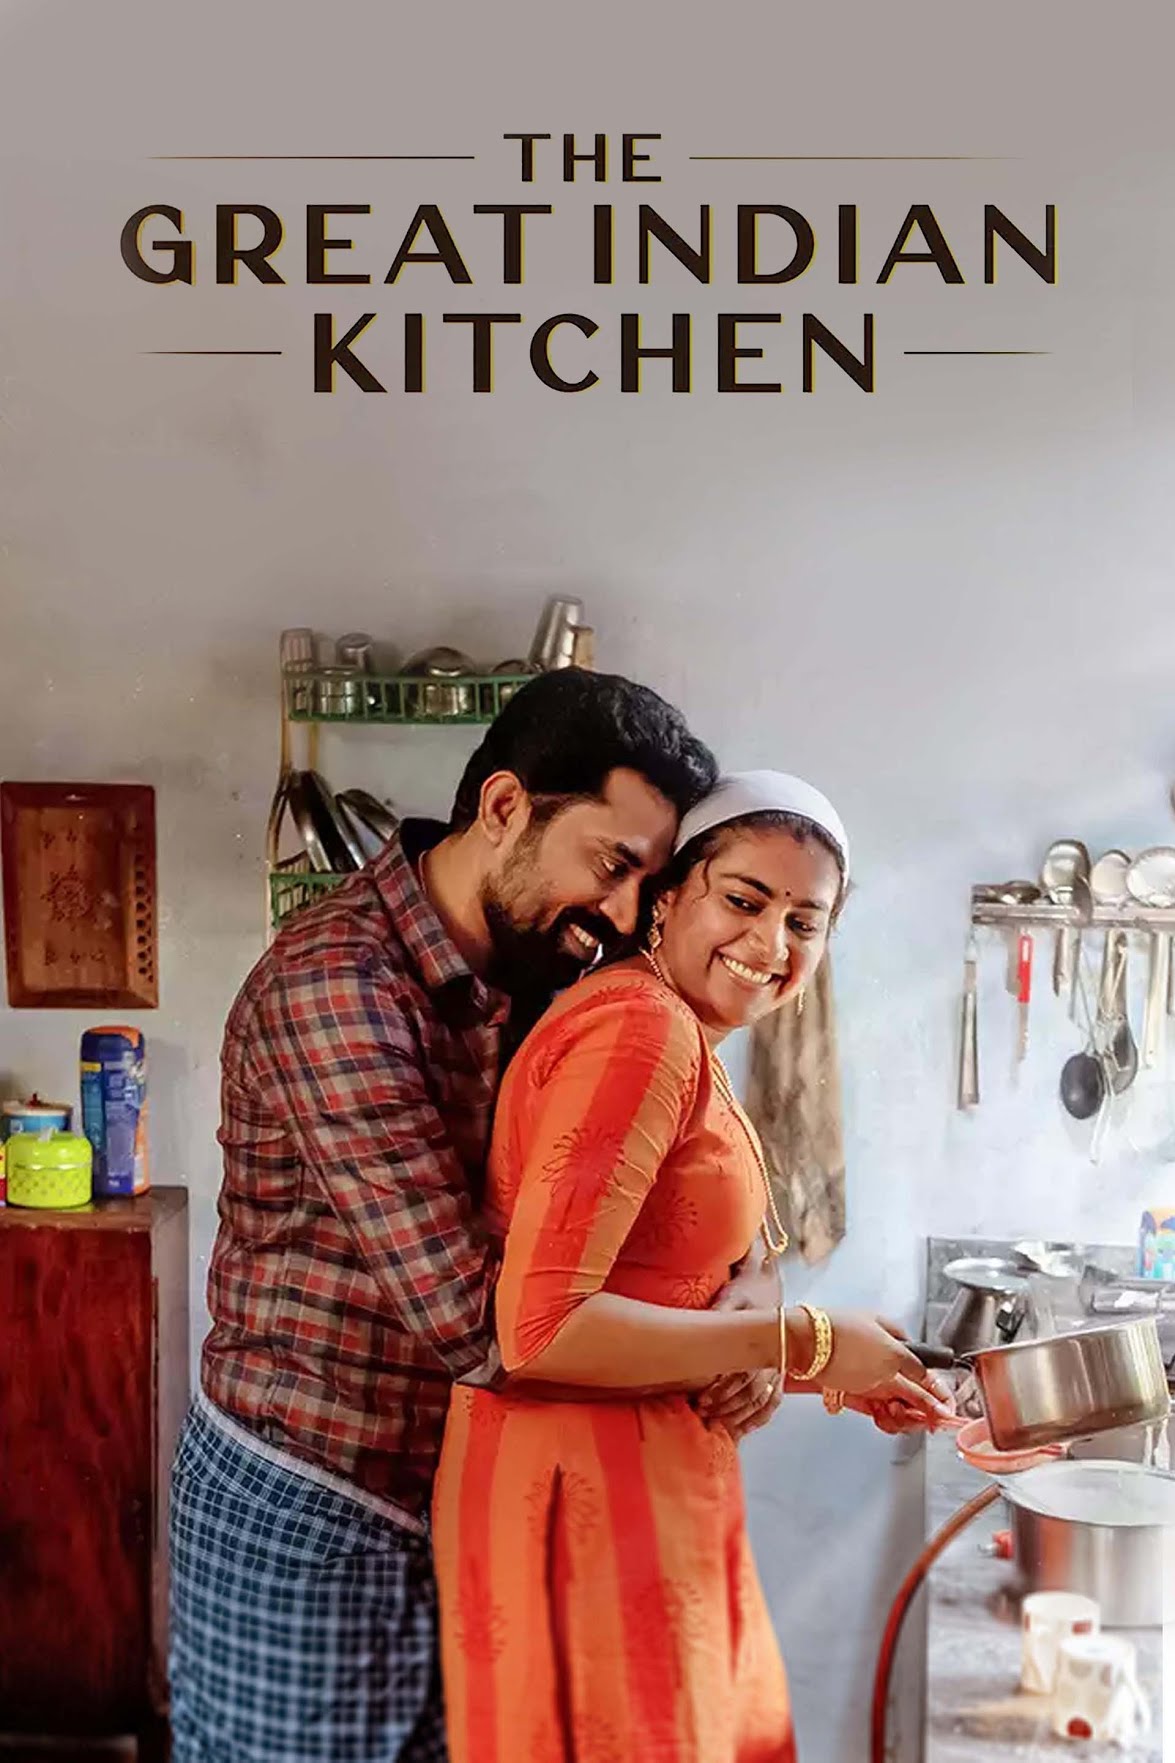 The Great Indian Kitchen 2021 Hindi Dub [UnOfficial] 720p 480p WEB-DL 700MB